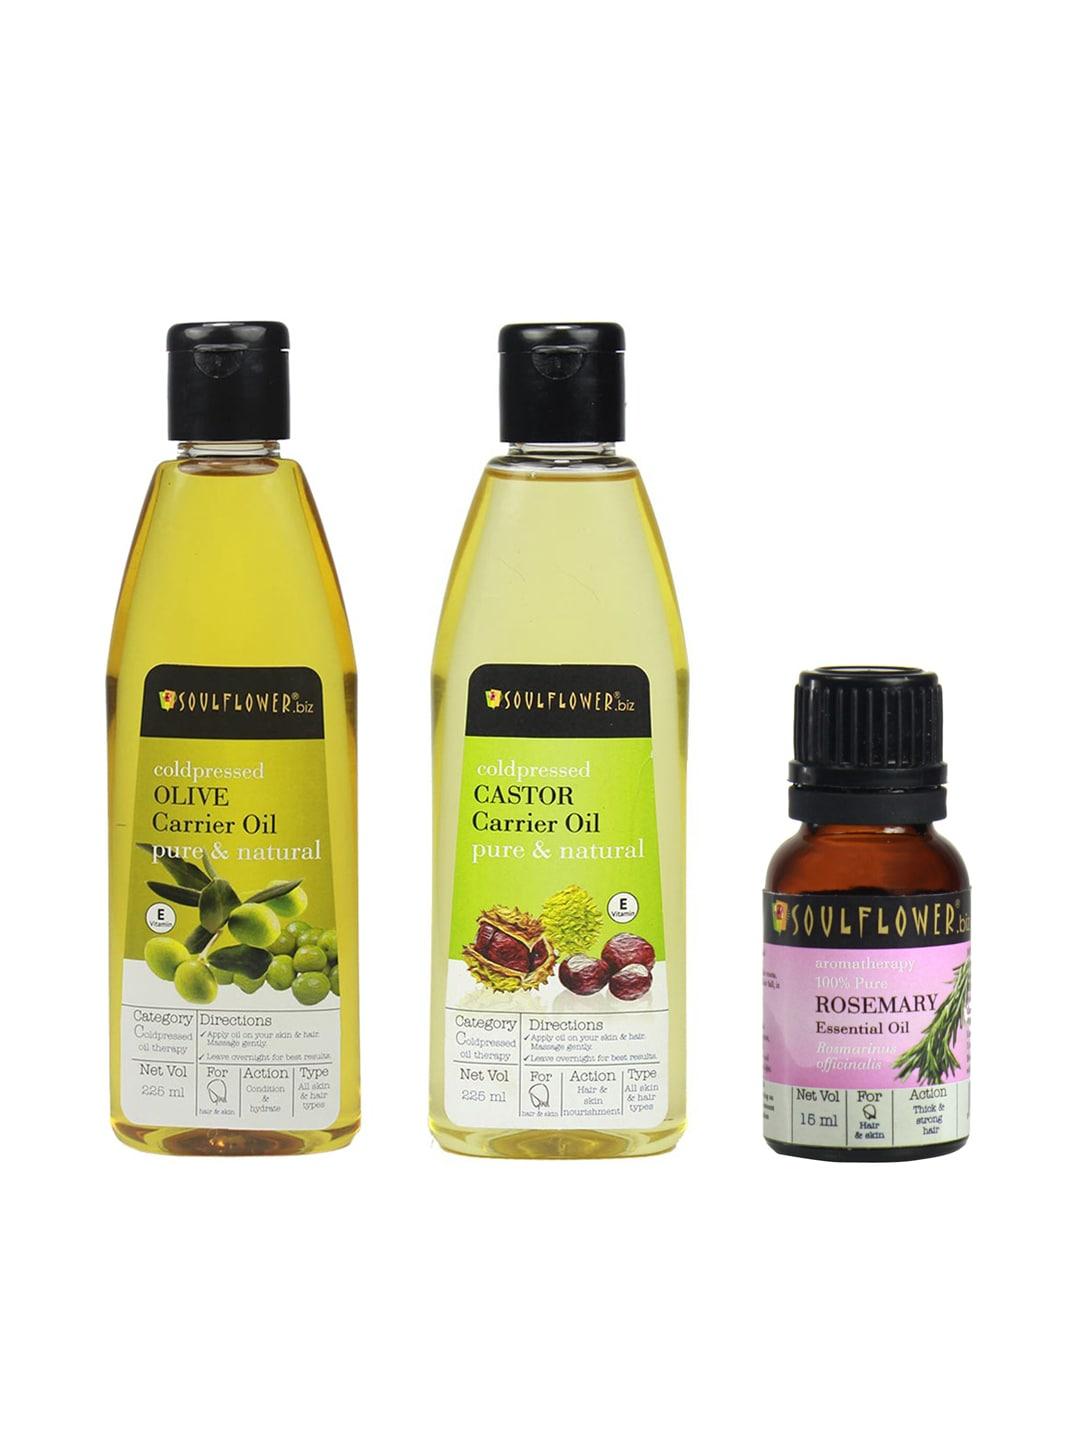 Soulflower Unisex Set of 3 Sustainable Hair Oils & Essential Oil For Dry Skin